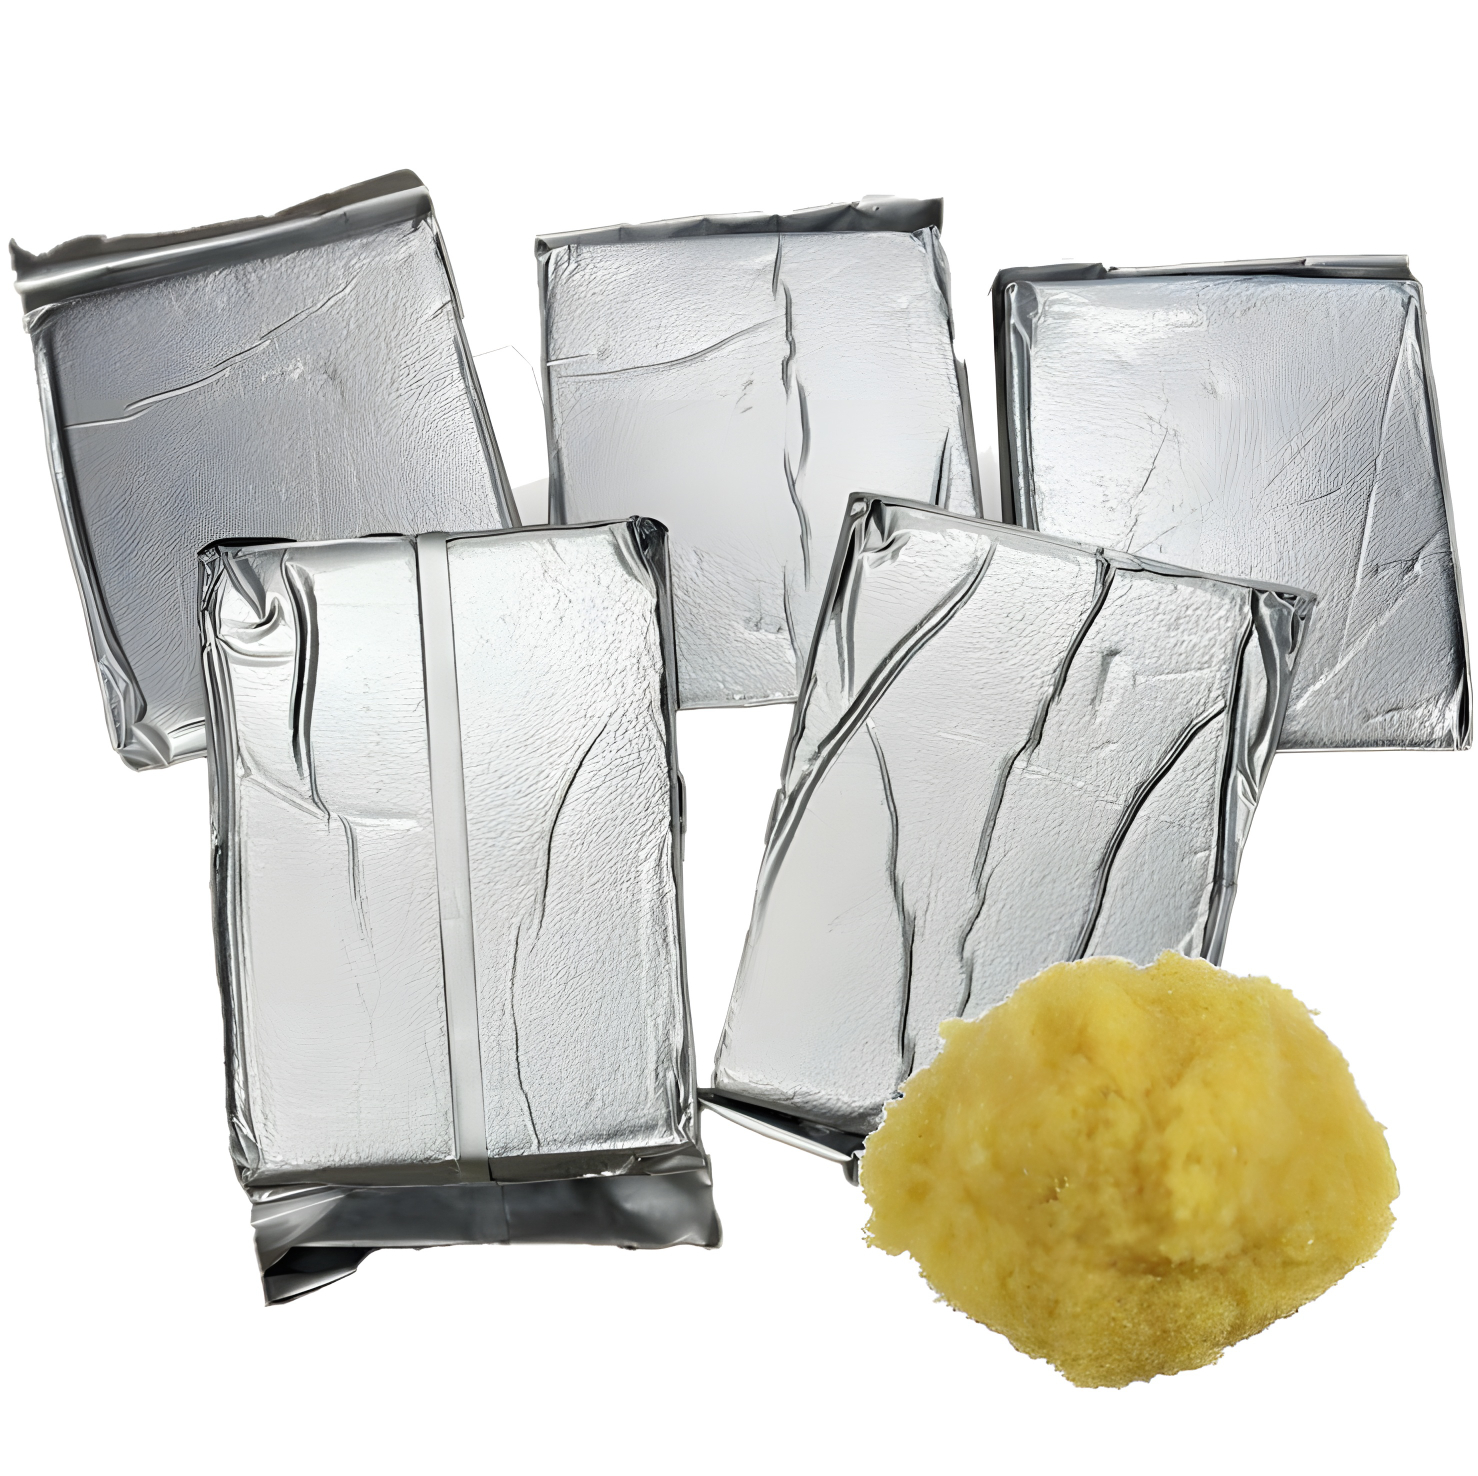 Resin DI Cubic foot - New Virgin Resin Questions & Answers